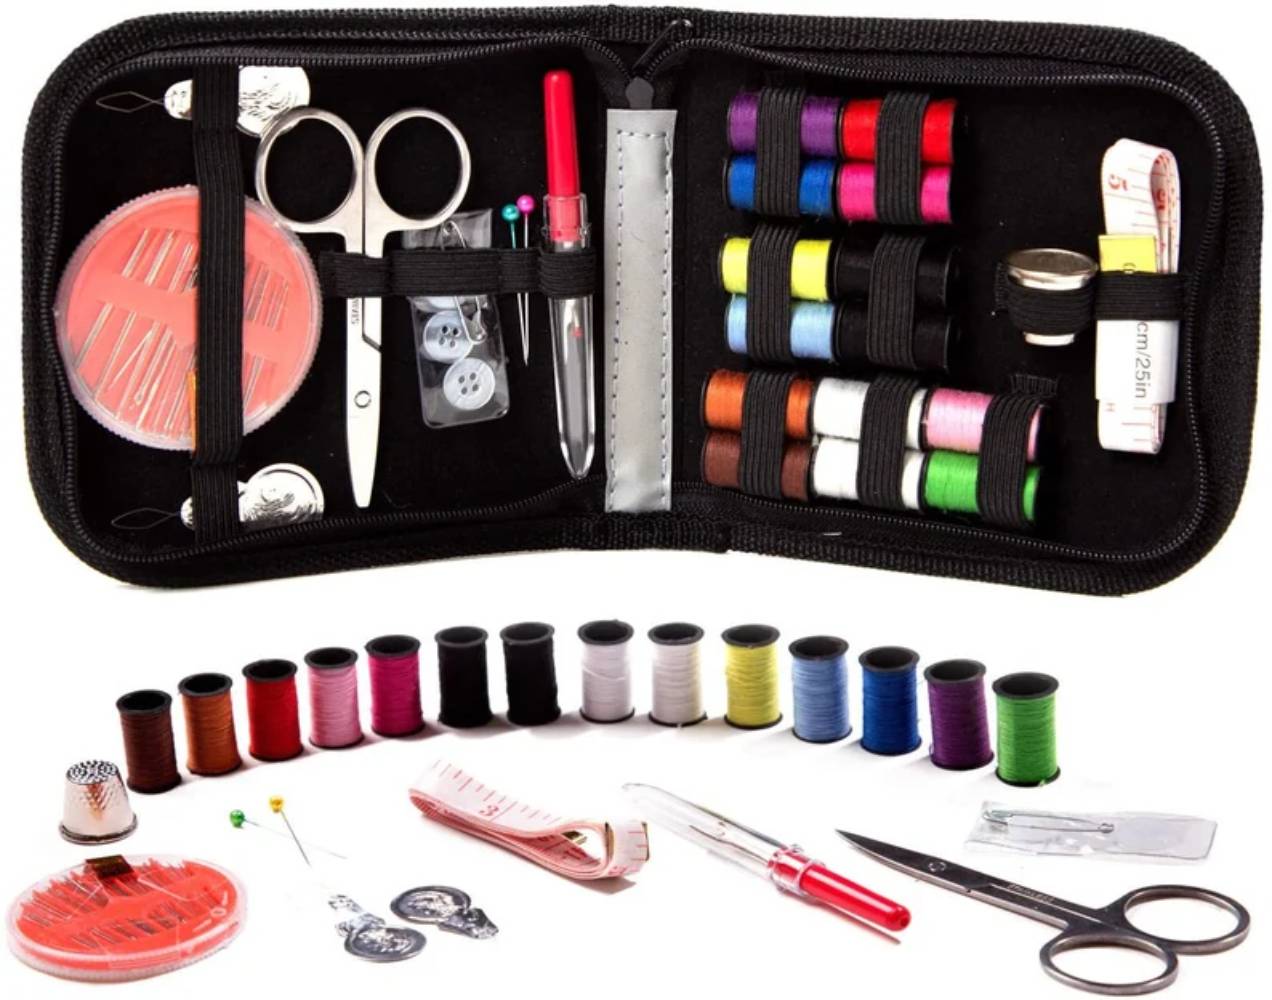 Portable Travel Sewing Kit Mini Sewing Box Quilting Stitching